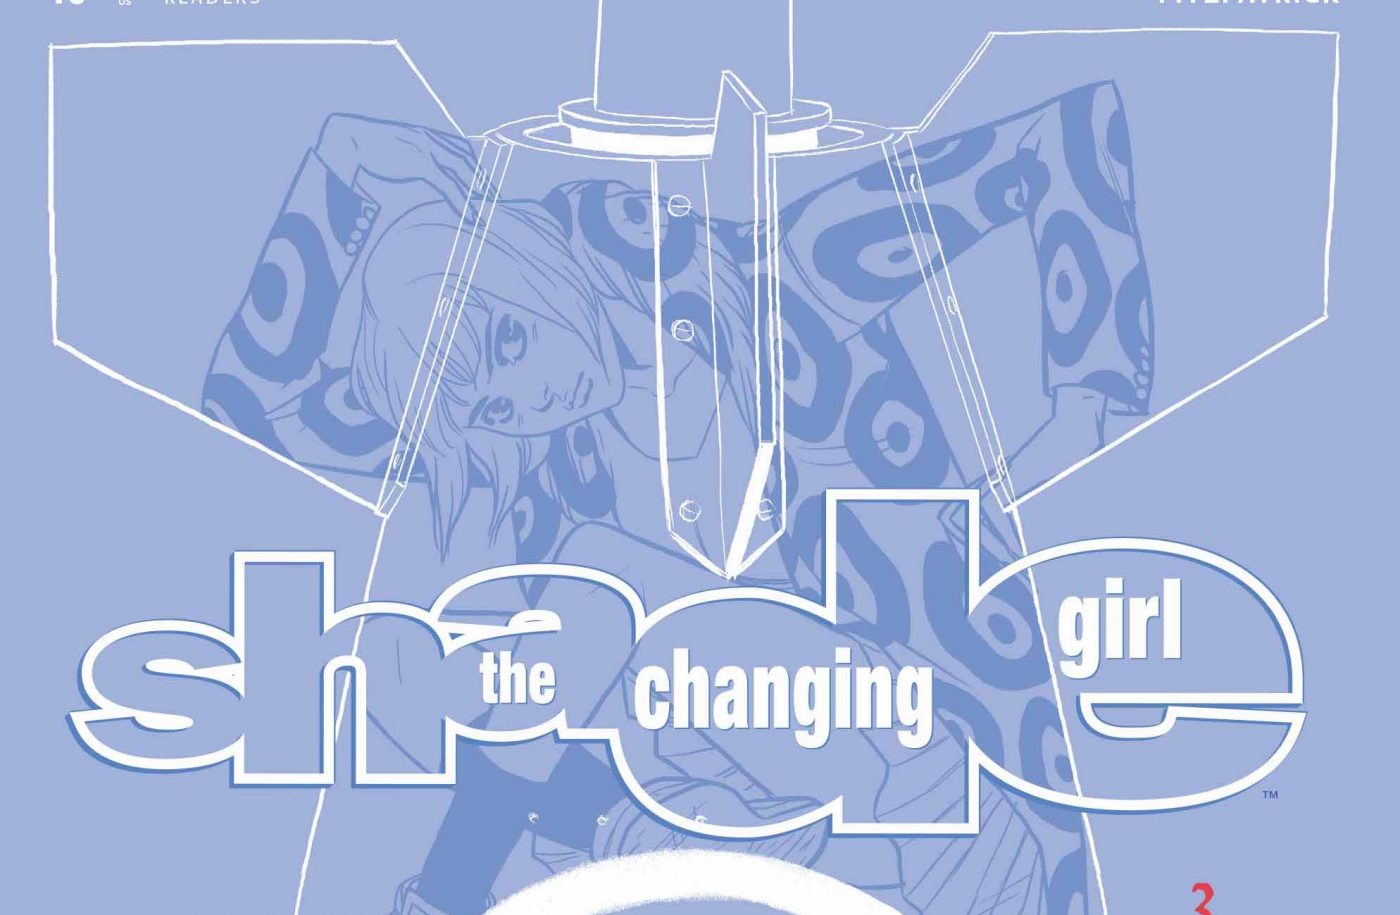 Shade, the Changing Girl #10 review